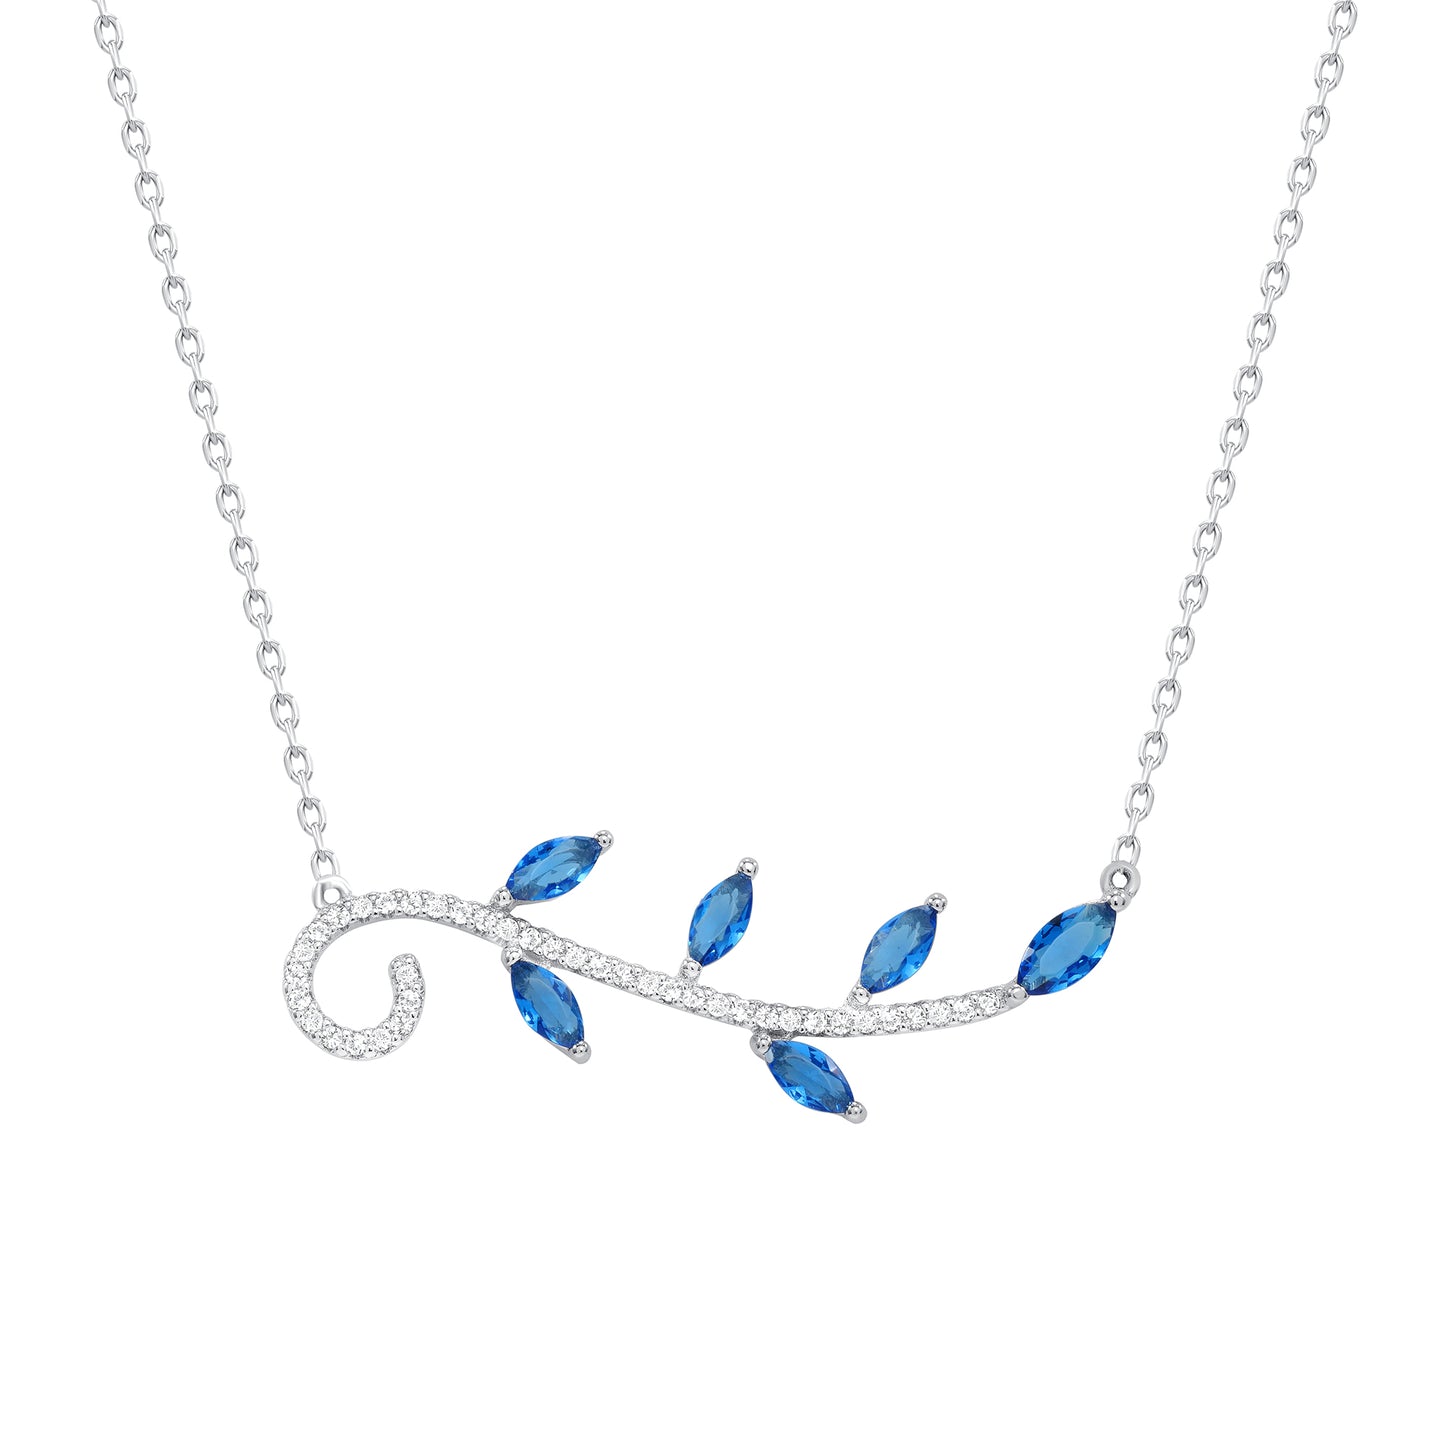 DGN1147BLU. Silver 925 Rhodium Plated Blue Cubic Zirconia Branch w/ Leaves Cubic Zirconia Necklace